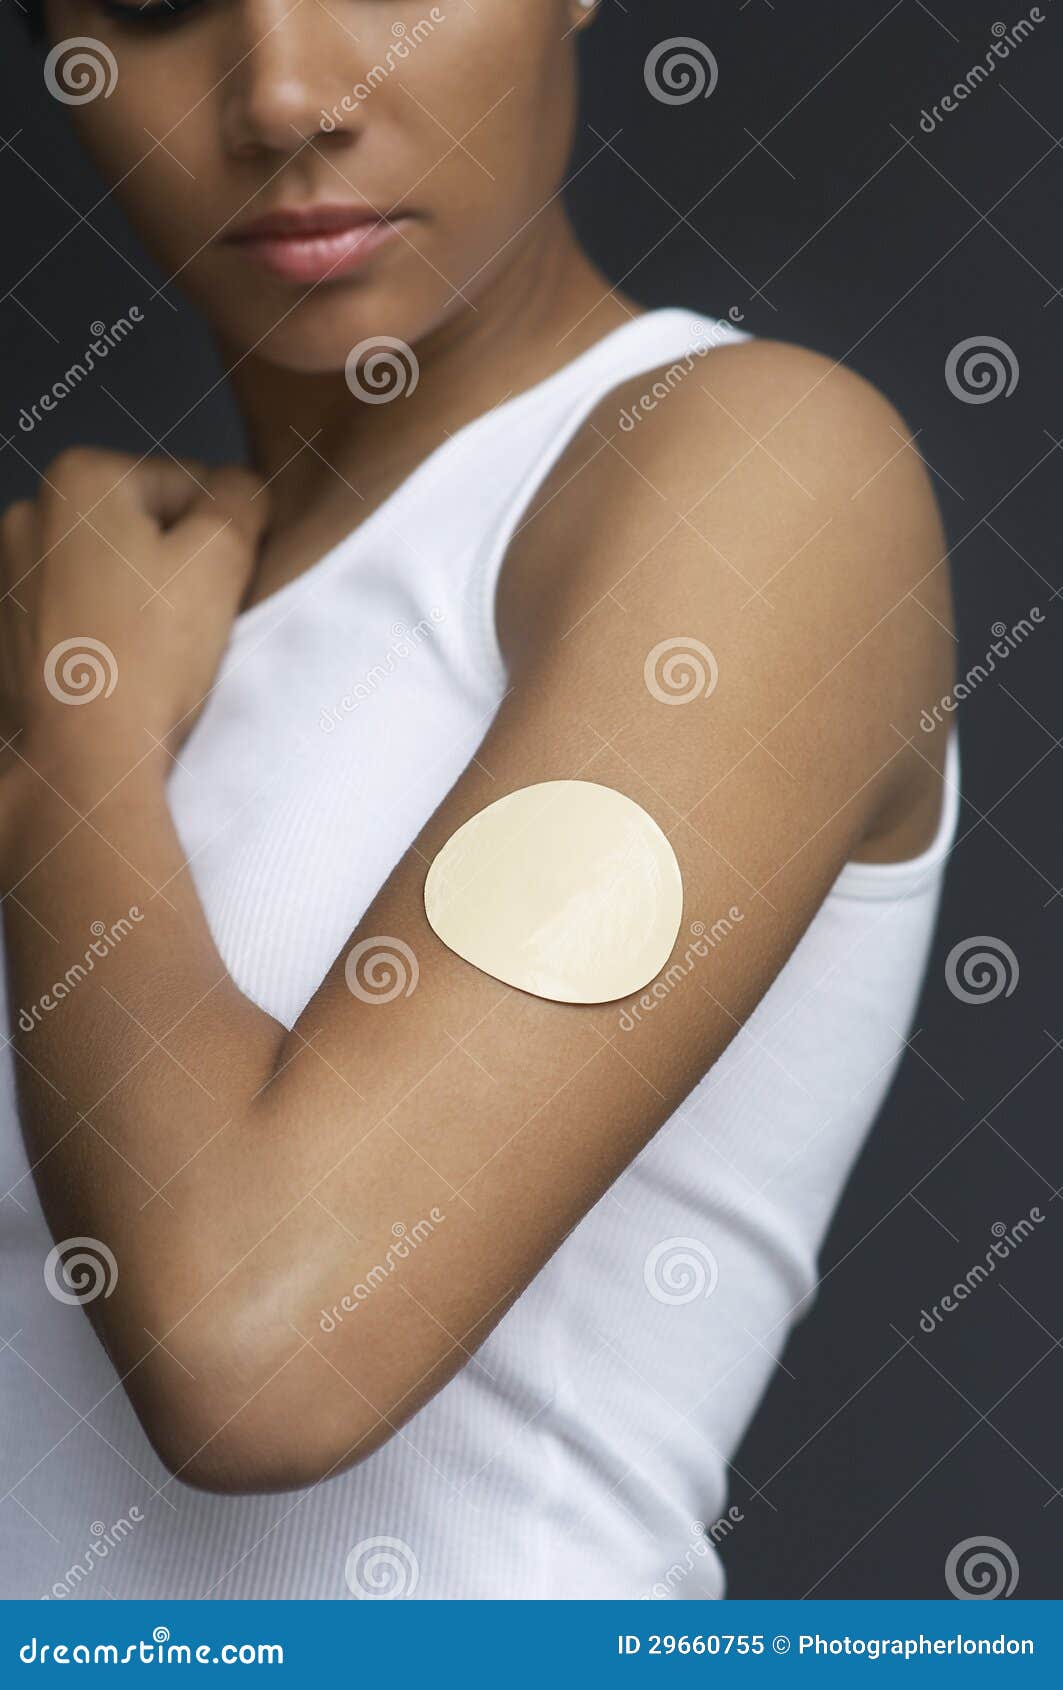 closeup of nicotine patch on female's arm